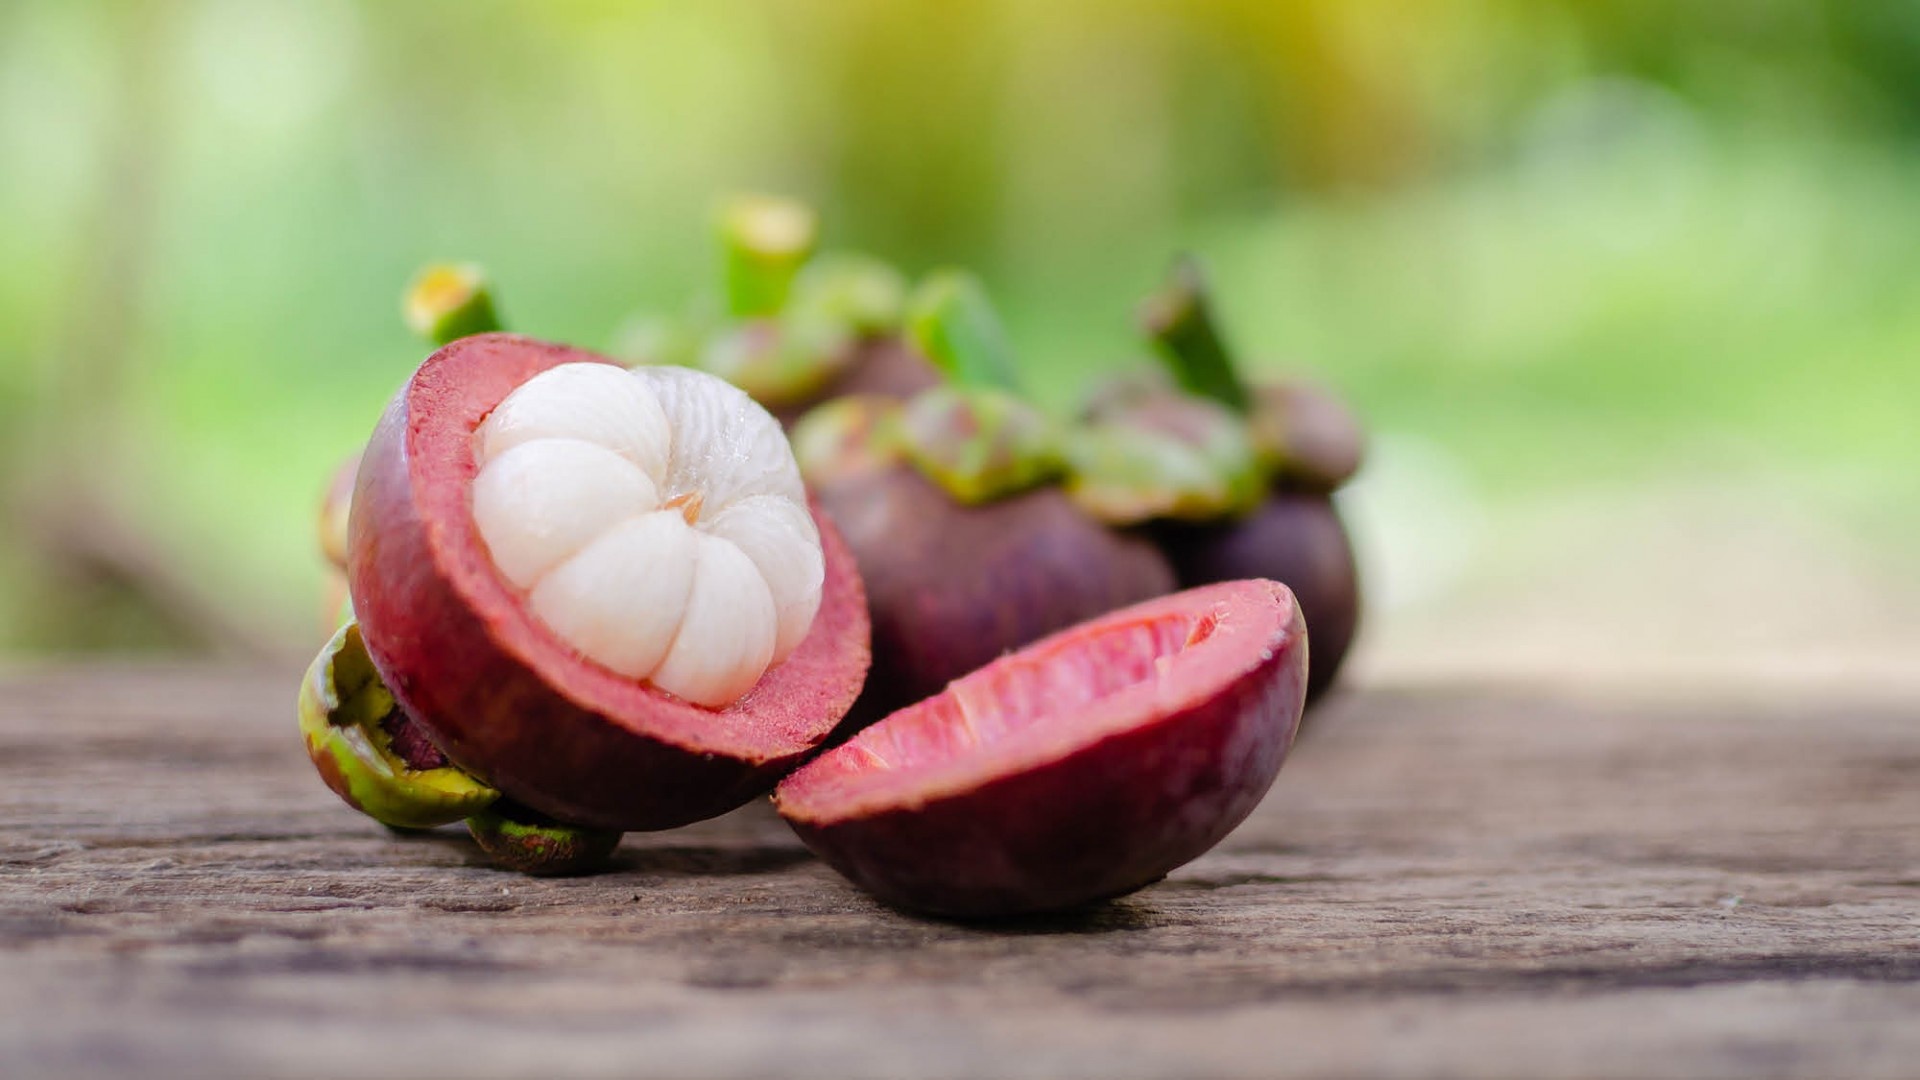 Mangosteen: Labeled as "superfruit" due to high content of antioxidants. 1920x1080 Full HD Wallpaper.